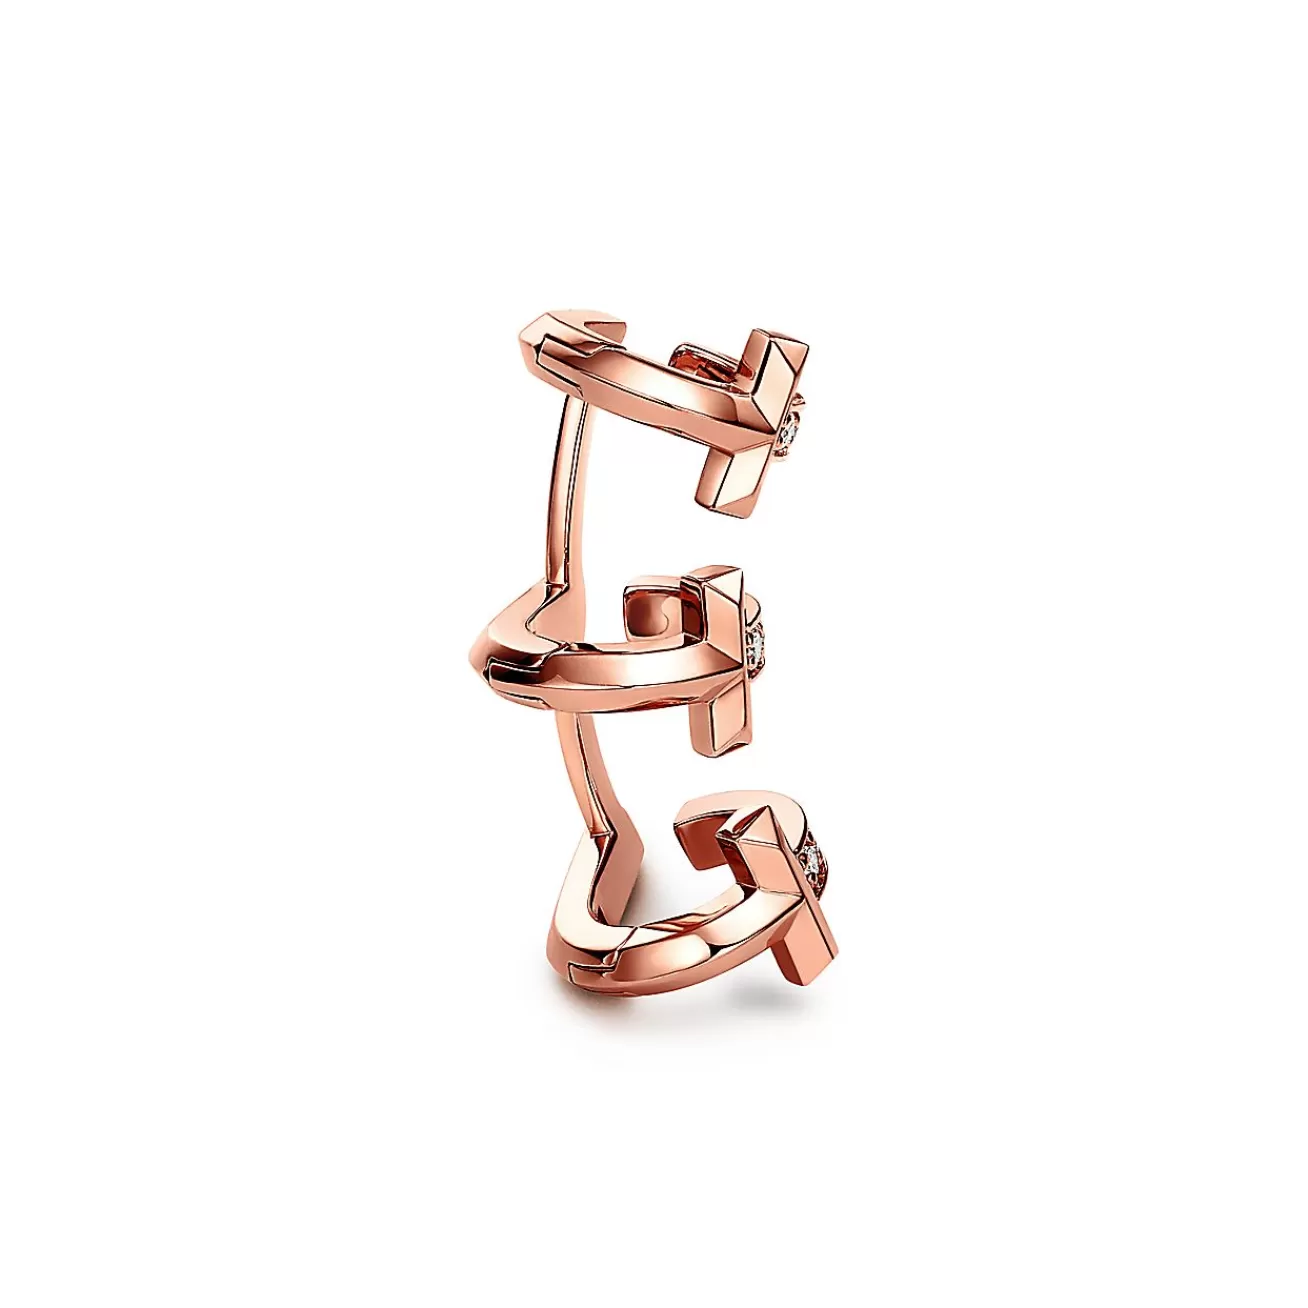 Tiffany & Co. Tiffany T T1 Ear Cuff in Rose Gold with Diamonds | ^ Earrings | Rose Gold Jewelry